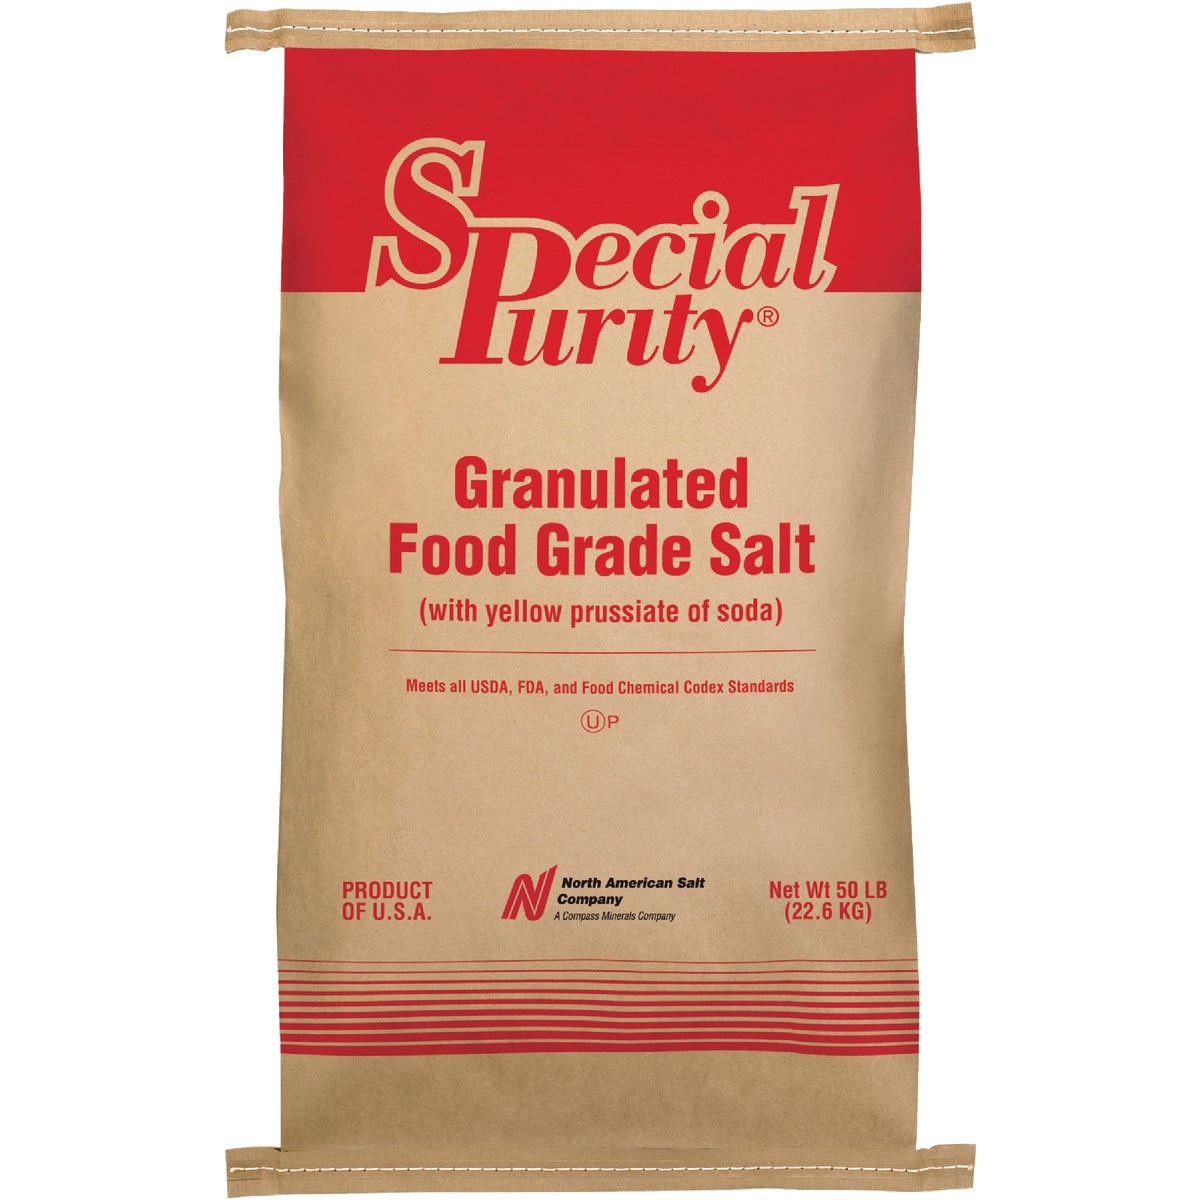 Item 701771, Granulated food grade salt with YPS (yellow prussiate of soda) added as an 